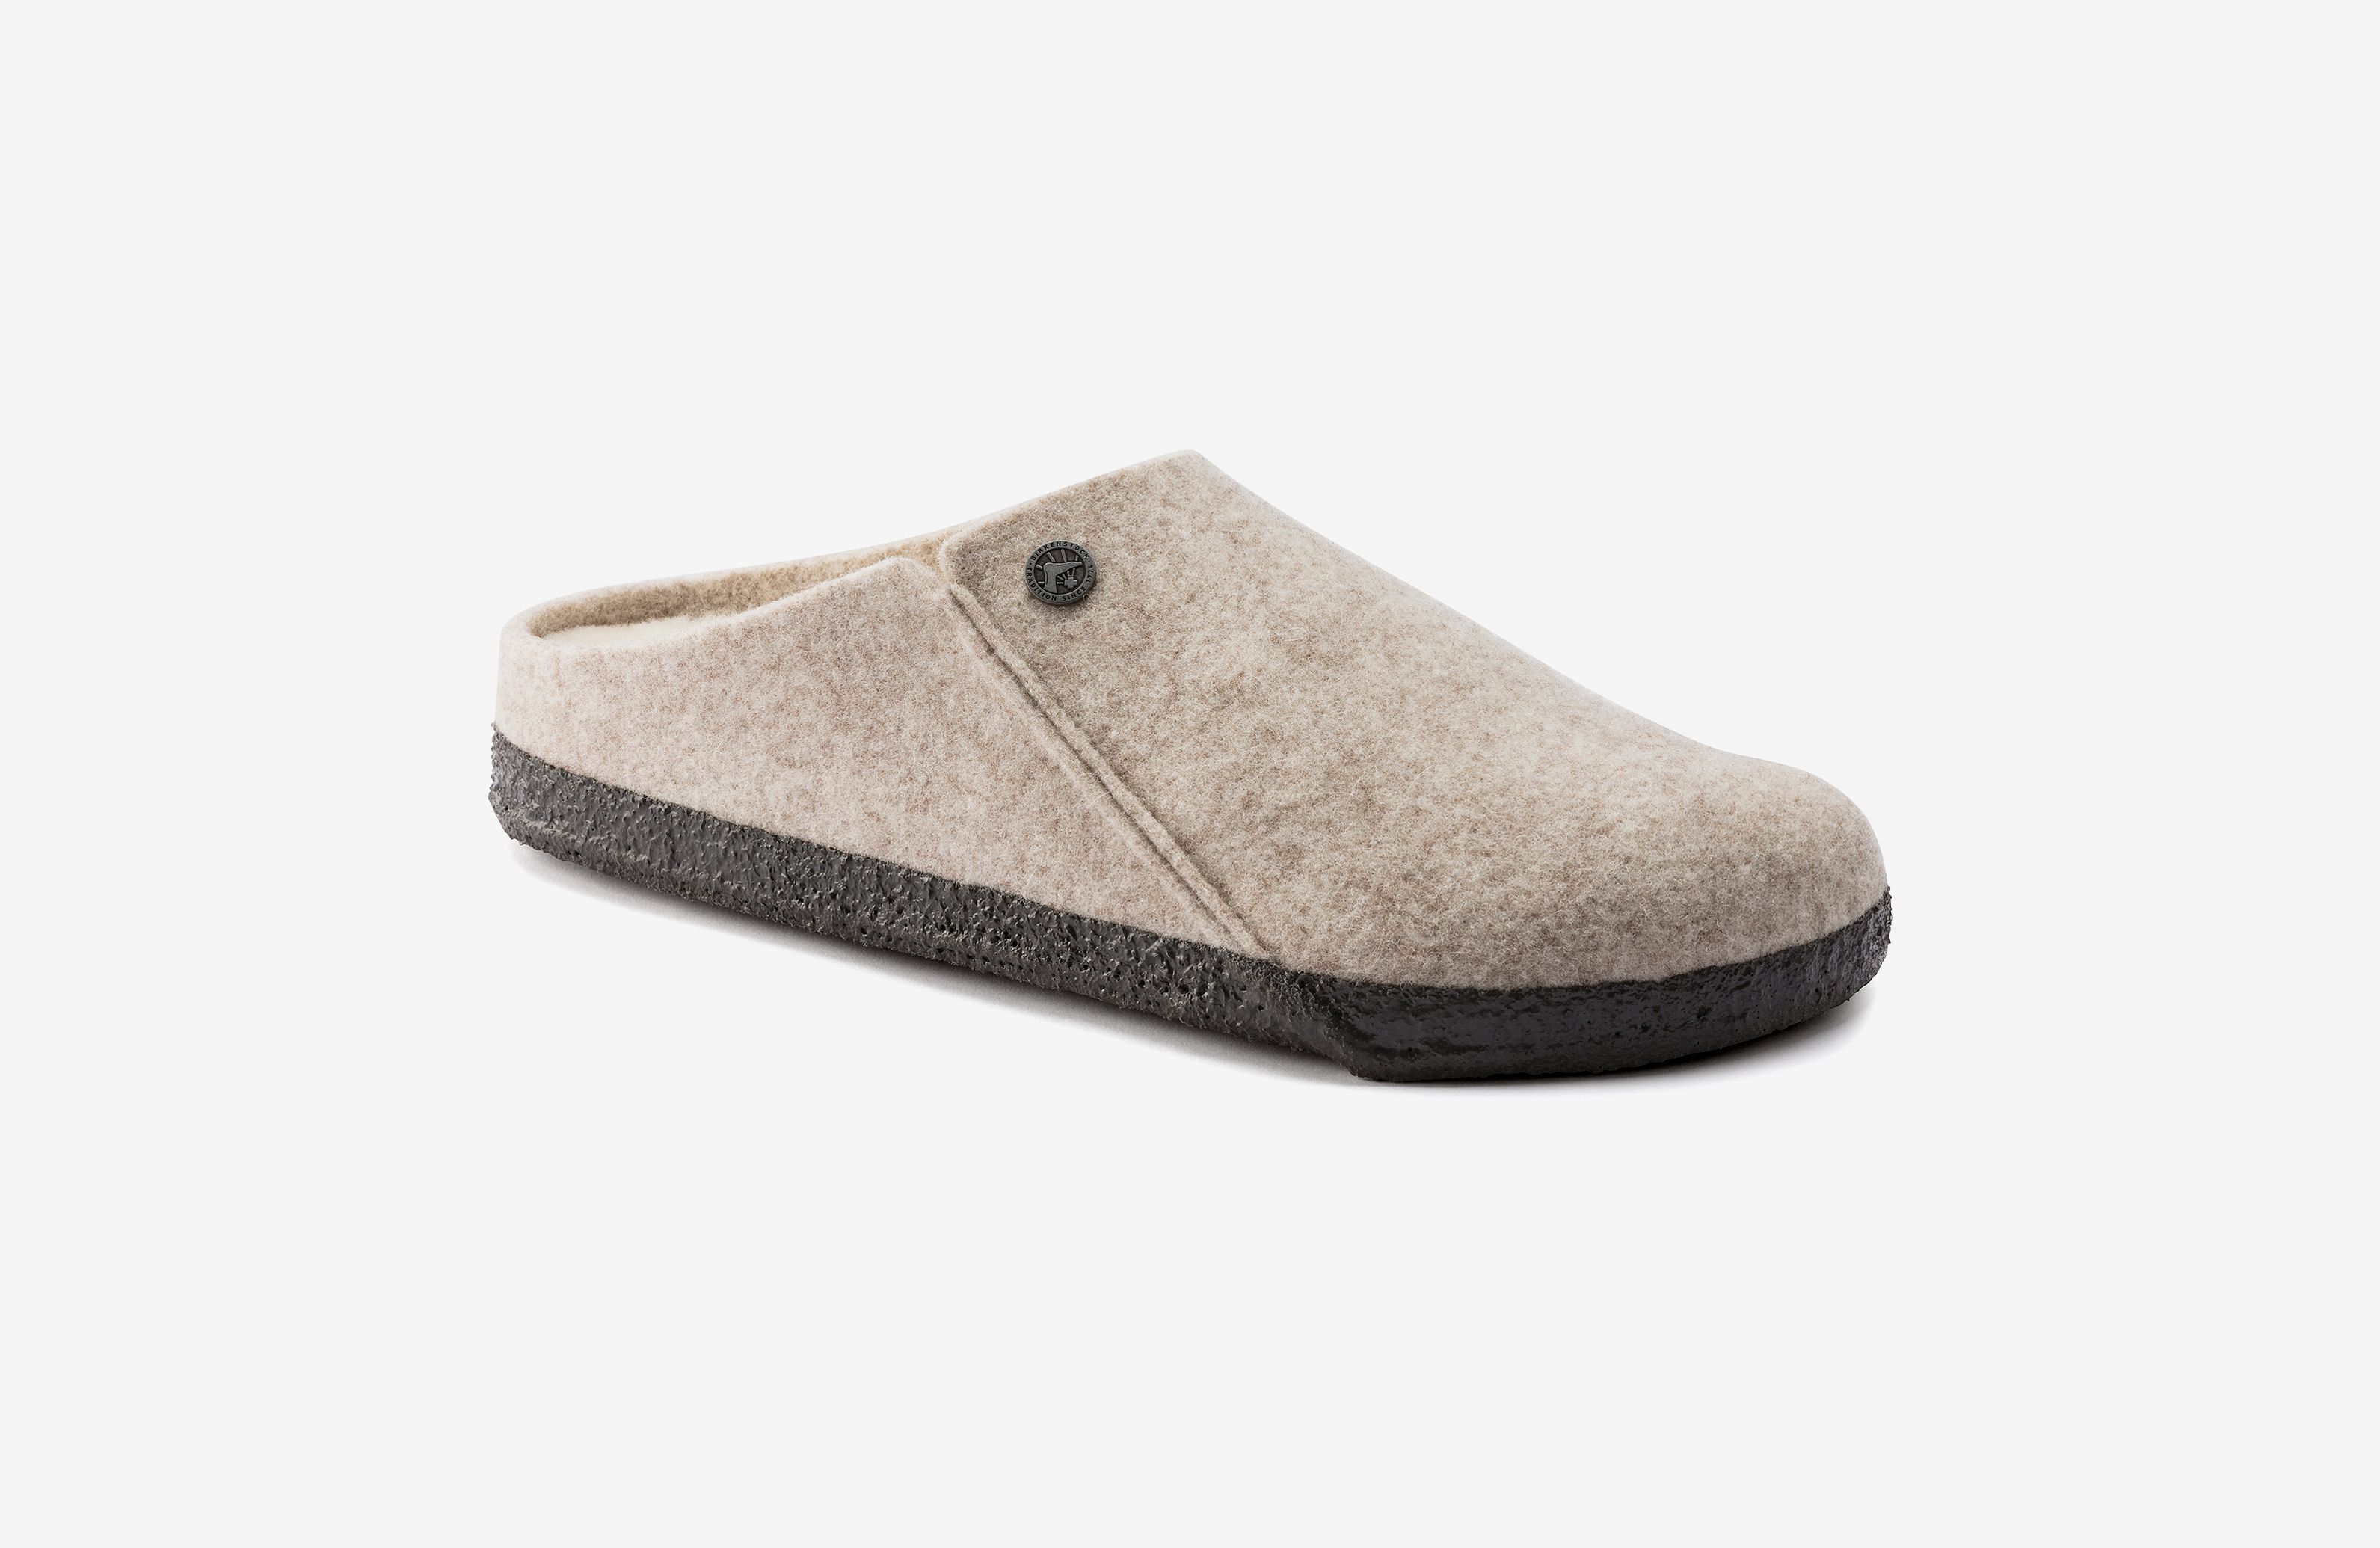 Womens Slippers & Floaters - Buy Womens Flip Flops & Floaters| Shoppers Stop-saigonsouth.com.vn